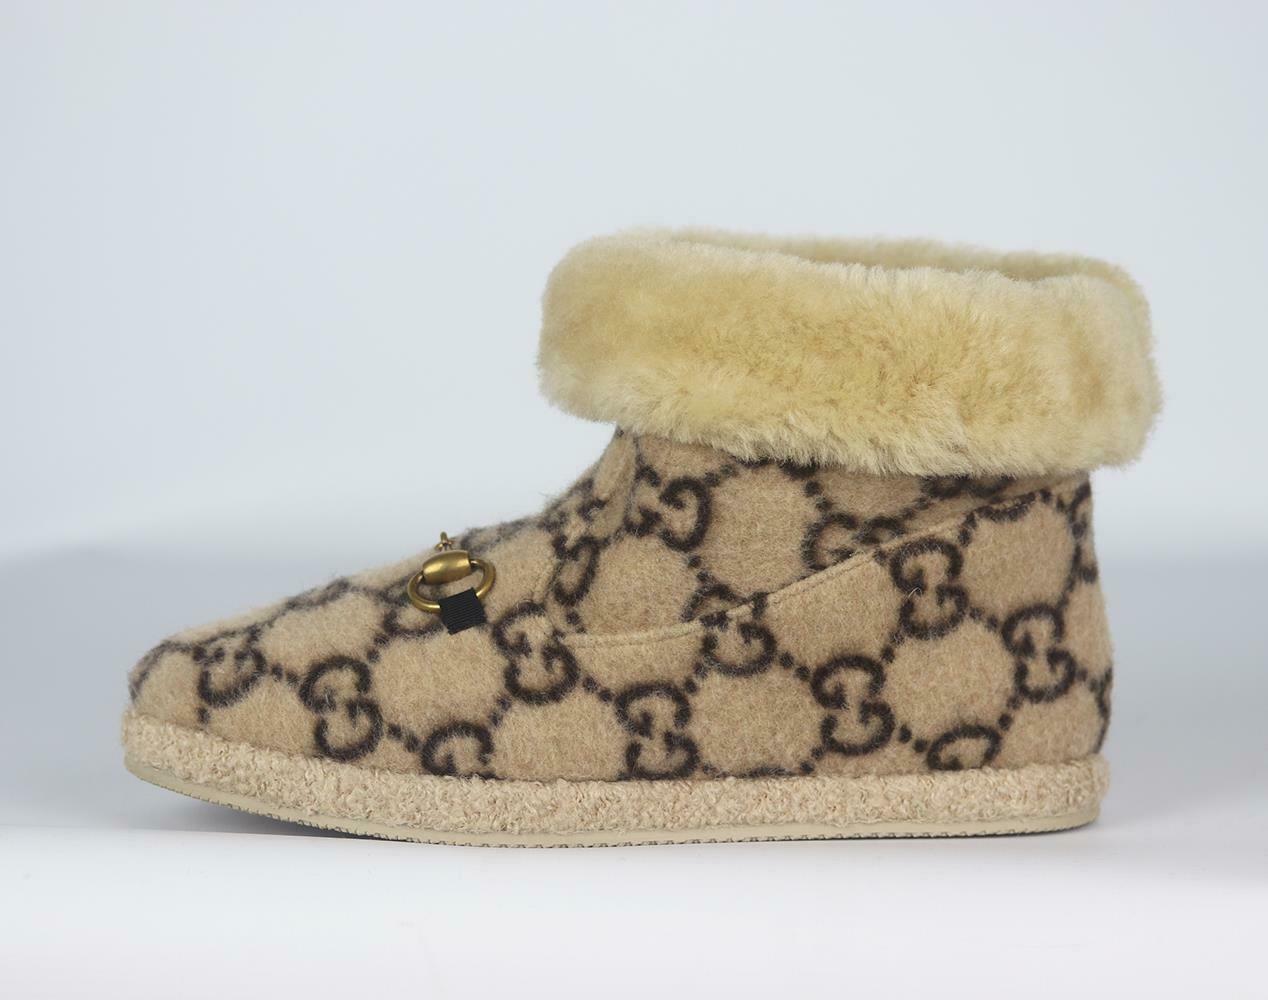 Inspired by traditional slippers, Gucci's 'Fria' ankle boots are ideal for lounging at home in or running errands at the weekend, they've been made in Italy from soft wool patterned with the house's 'GG' motif and are embellished with a gold